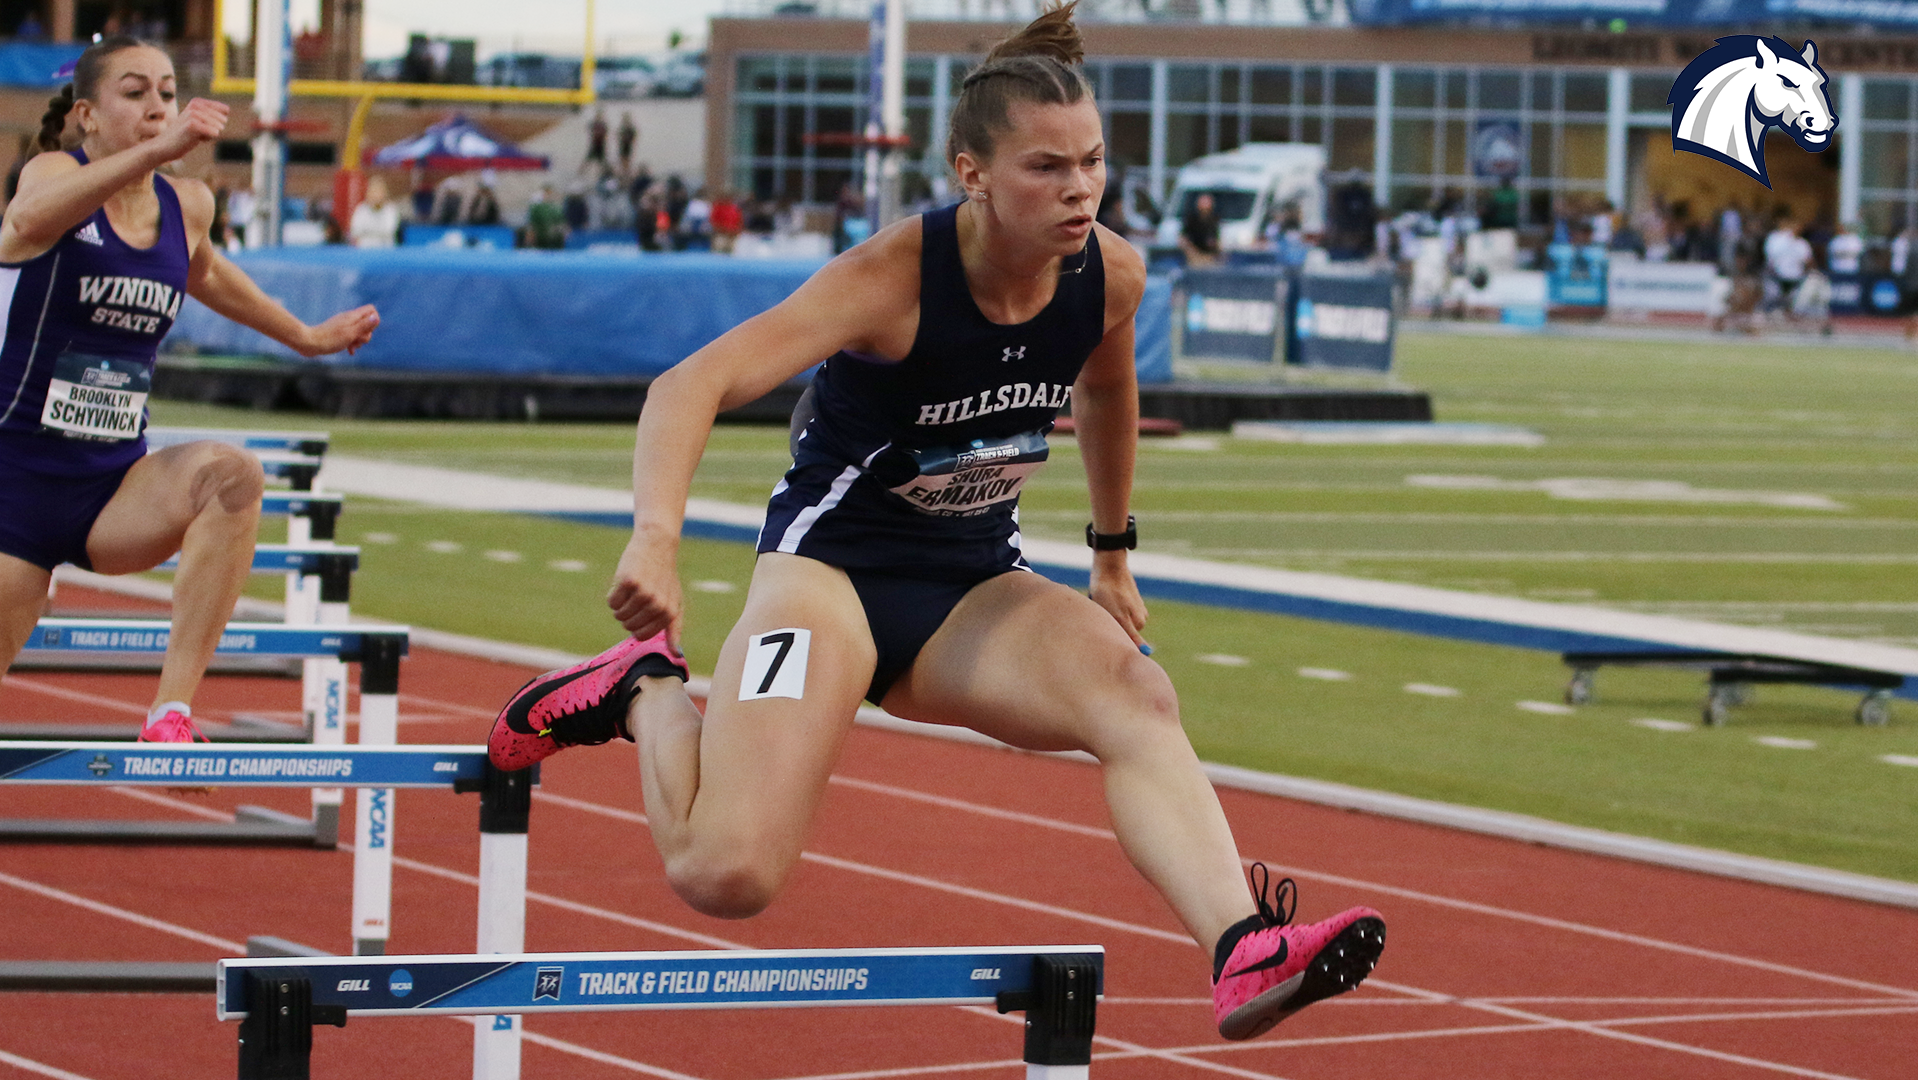 Charger women win seven events, post three provisional marks at Lee University Invite